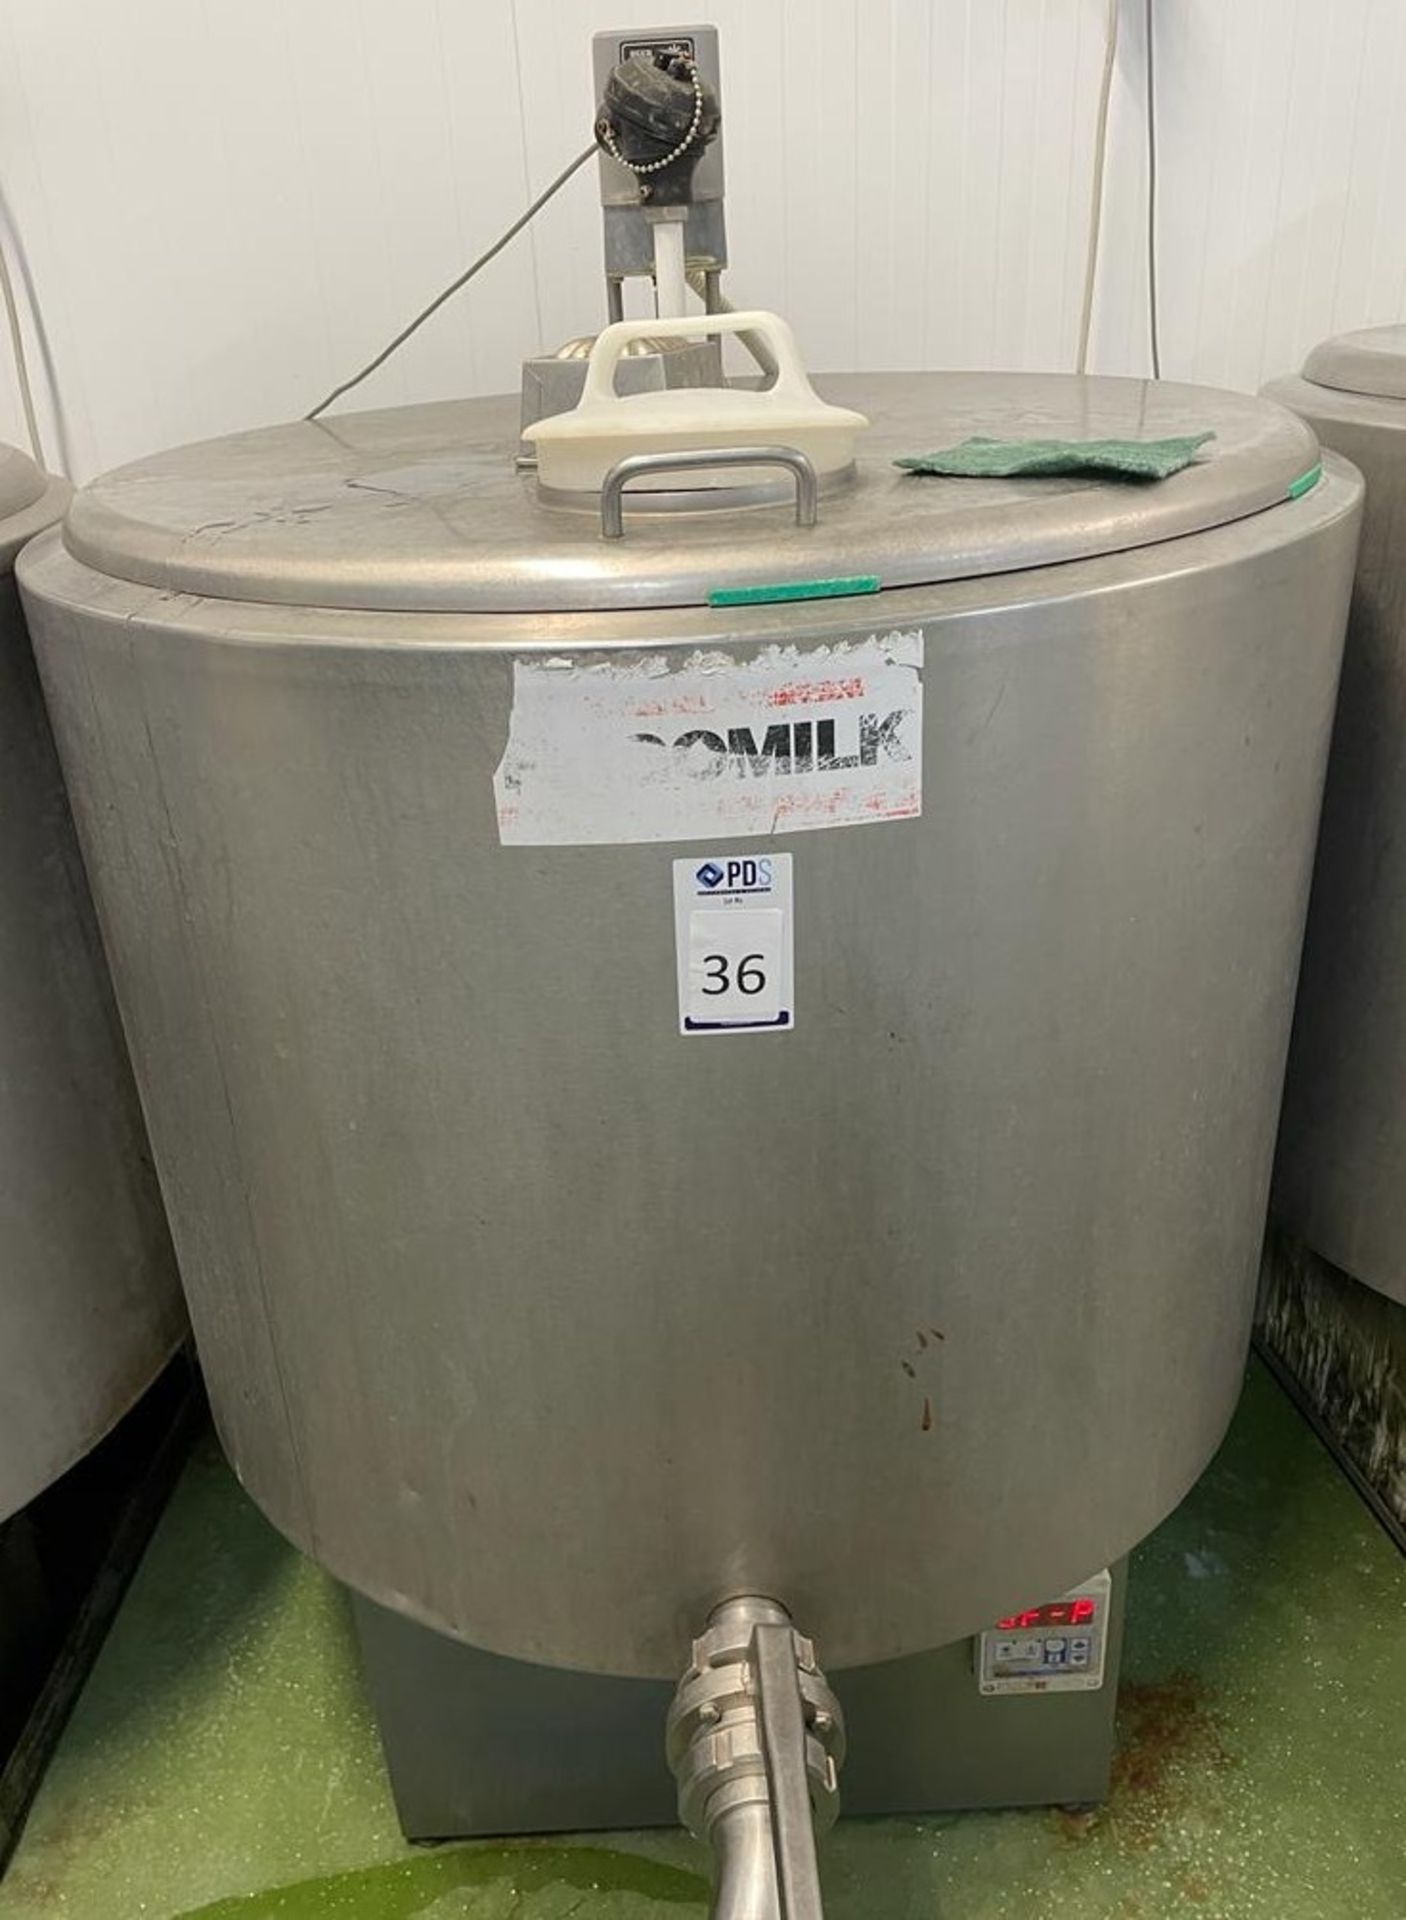 Stainless Steel Aging Tank, 300L Capacity (Location: NW London. Please Refer to General Notes)